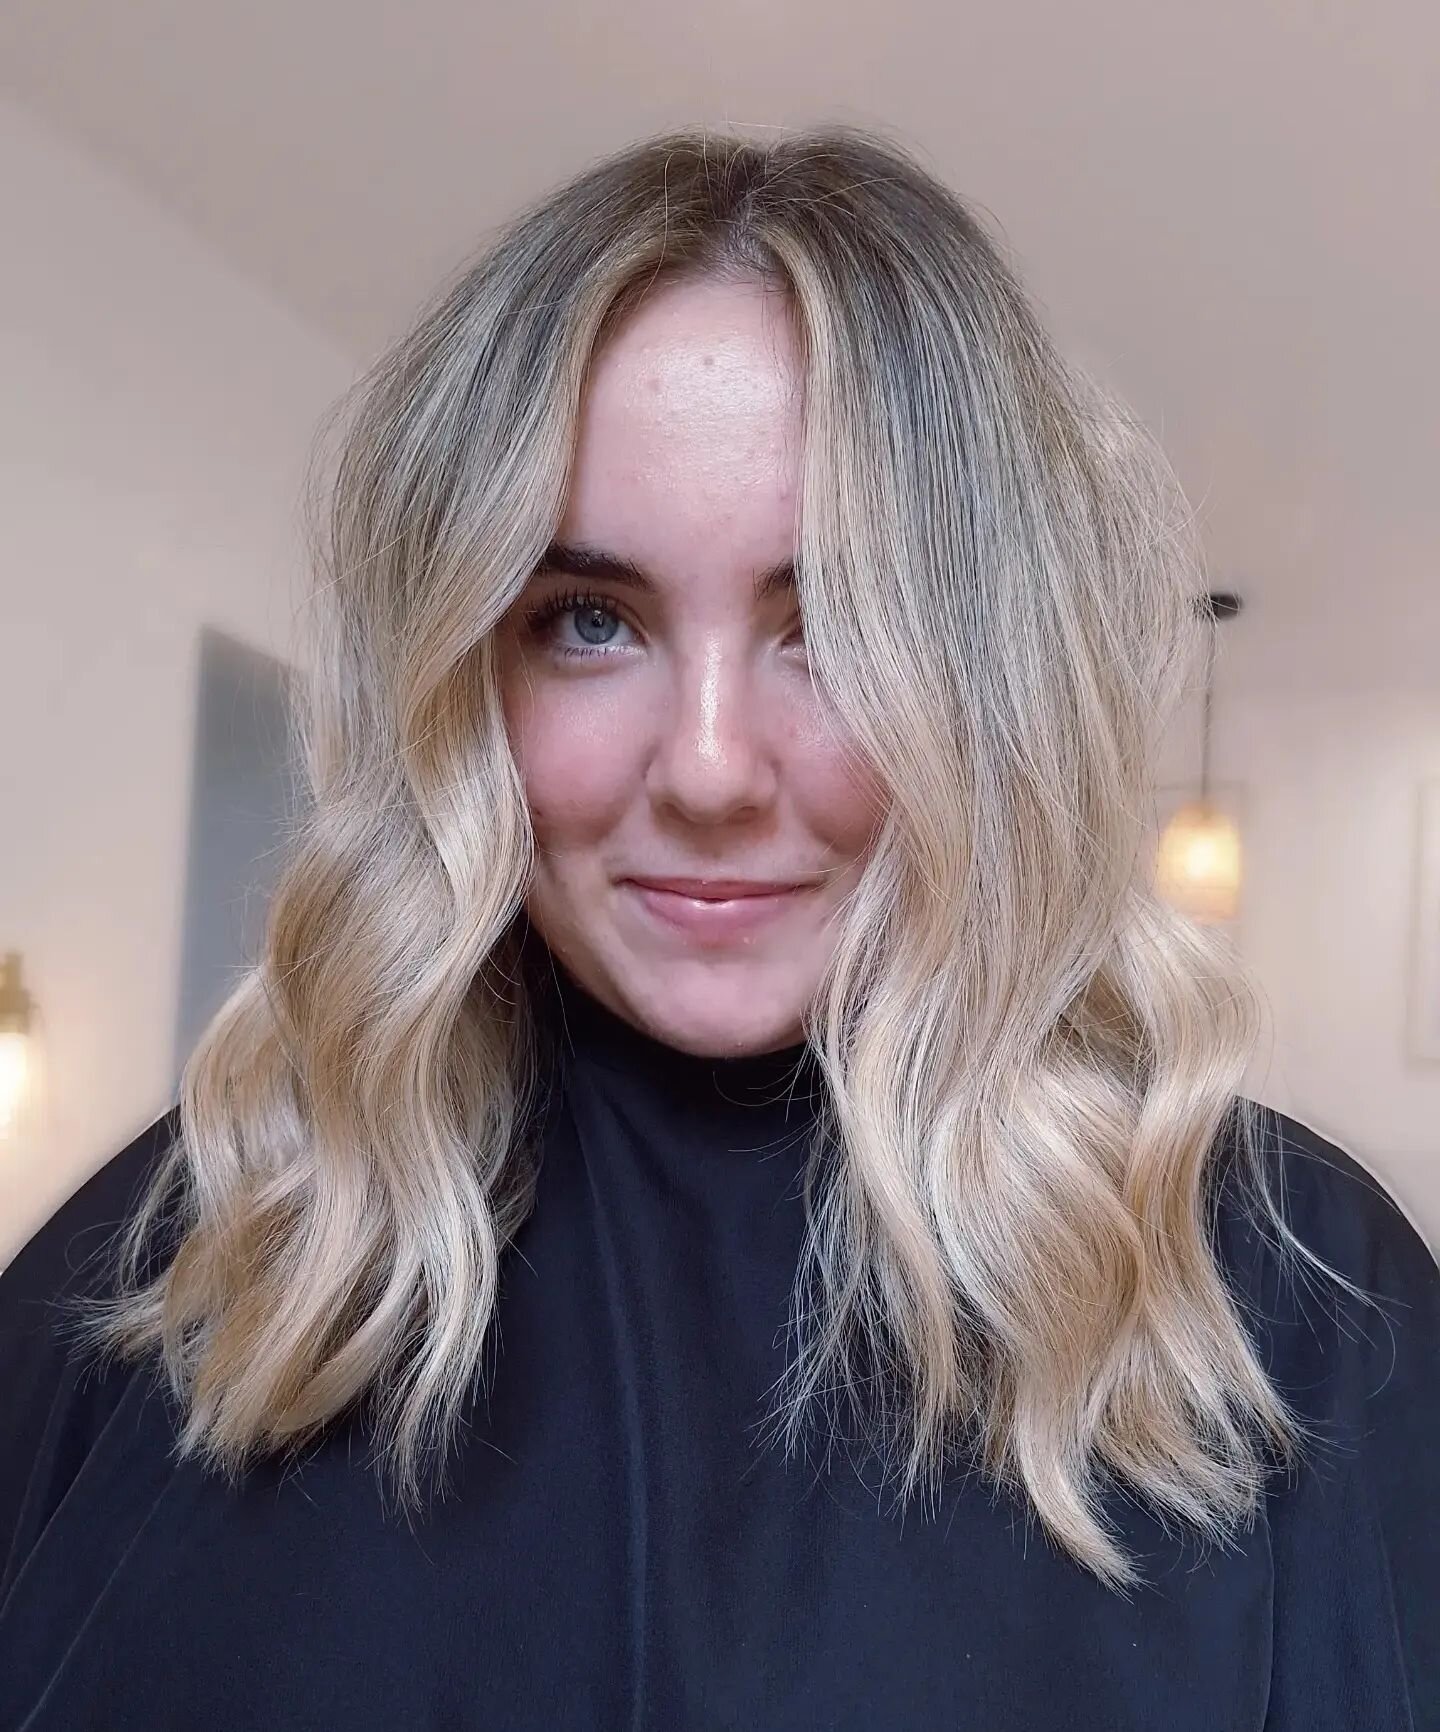 Soft roots &amp; neutral tones 🫶🏼

Colour &amp; Cut by @kailee.blendyandtrendy 

If you'd like to book with Kailee, you can find her contact info in the highlights section! *Please note that for new clients she requires a consultation first*

For g